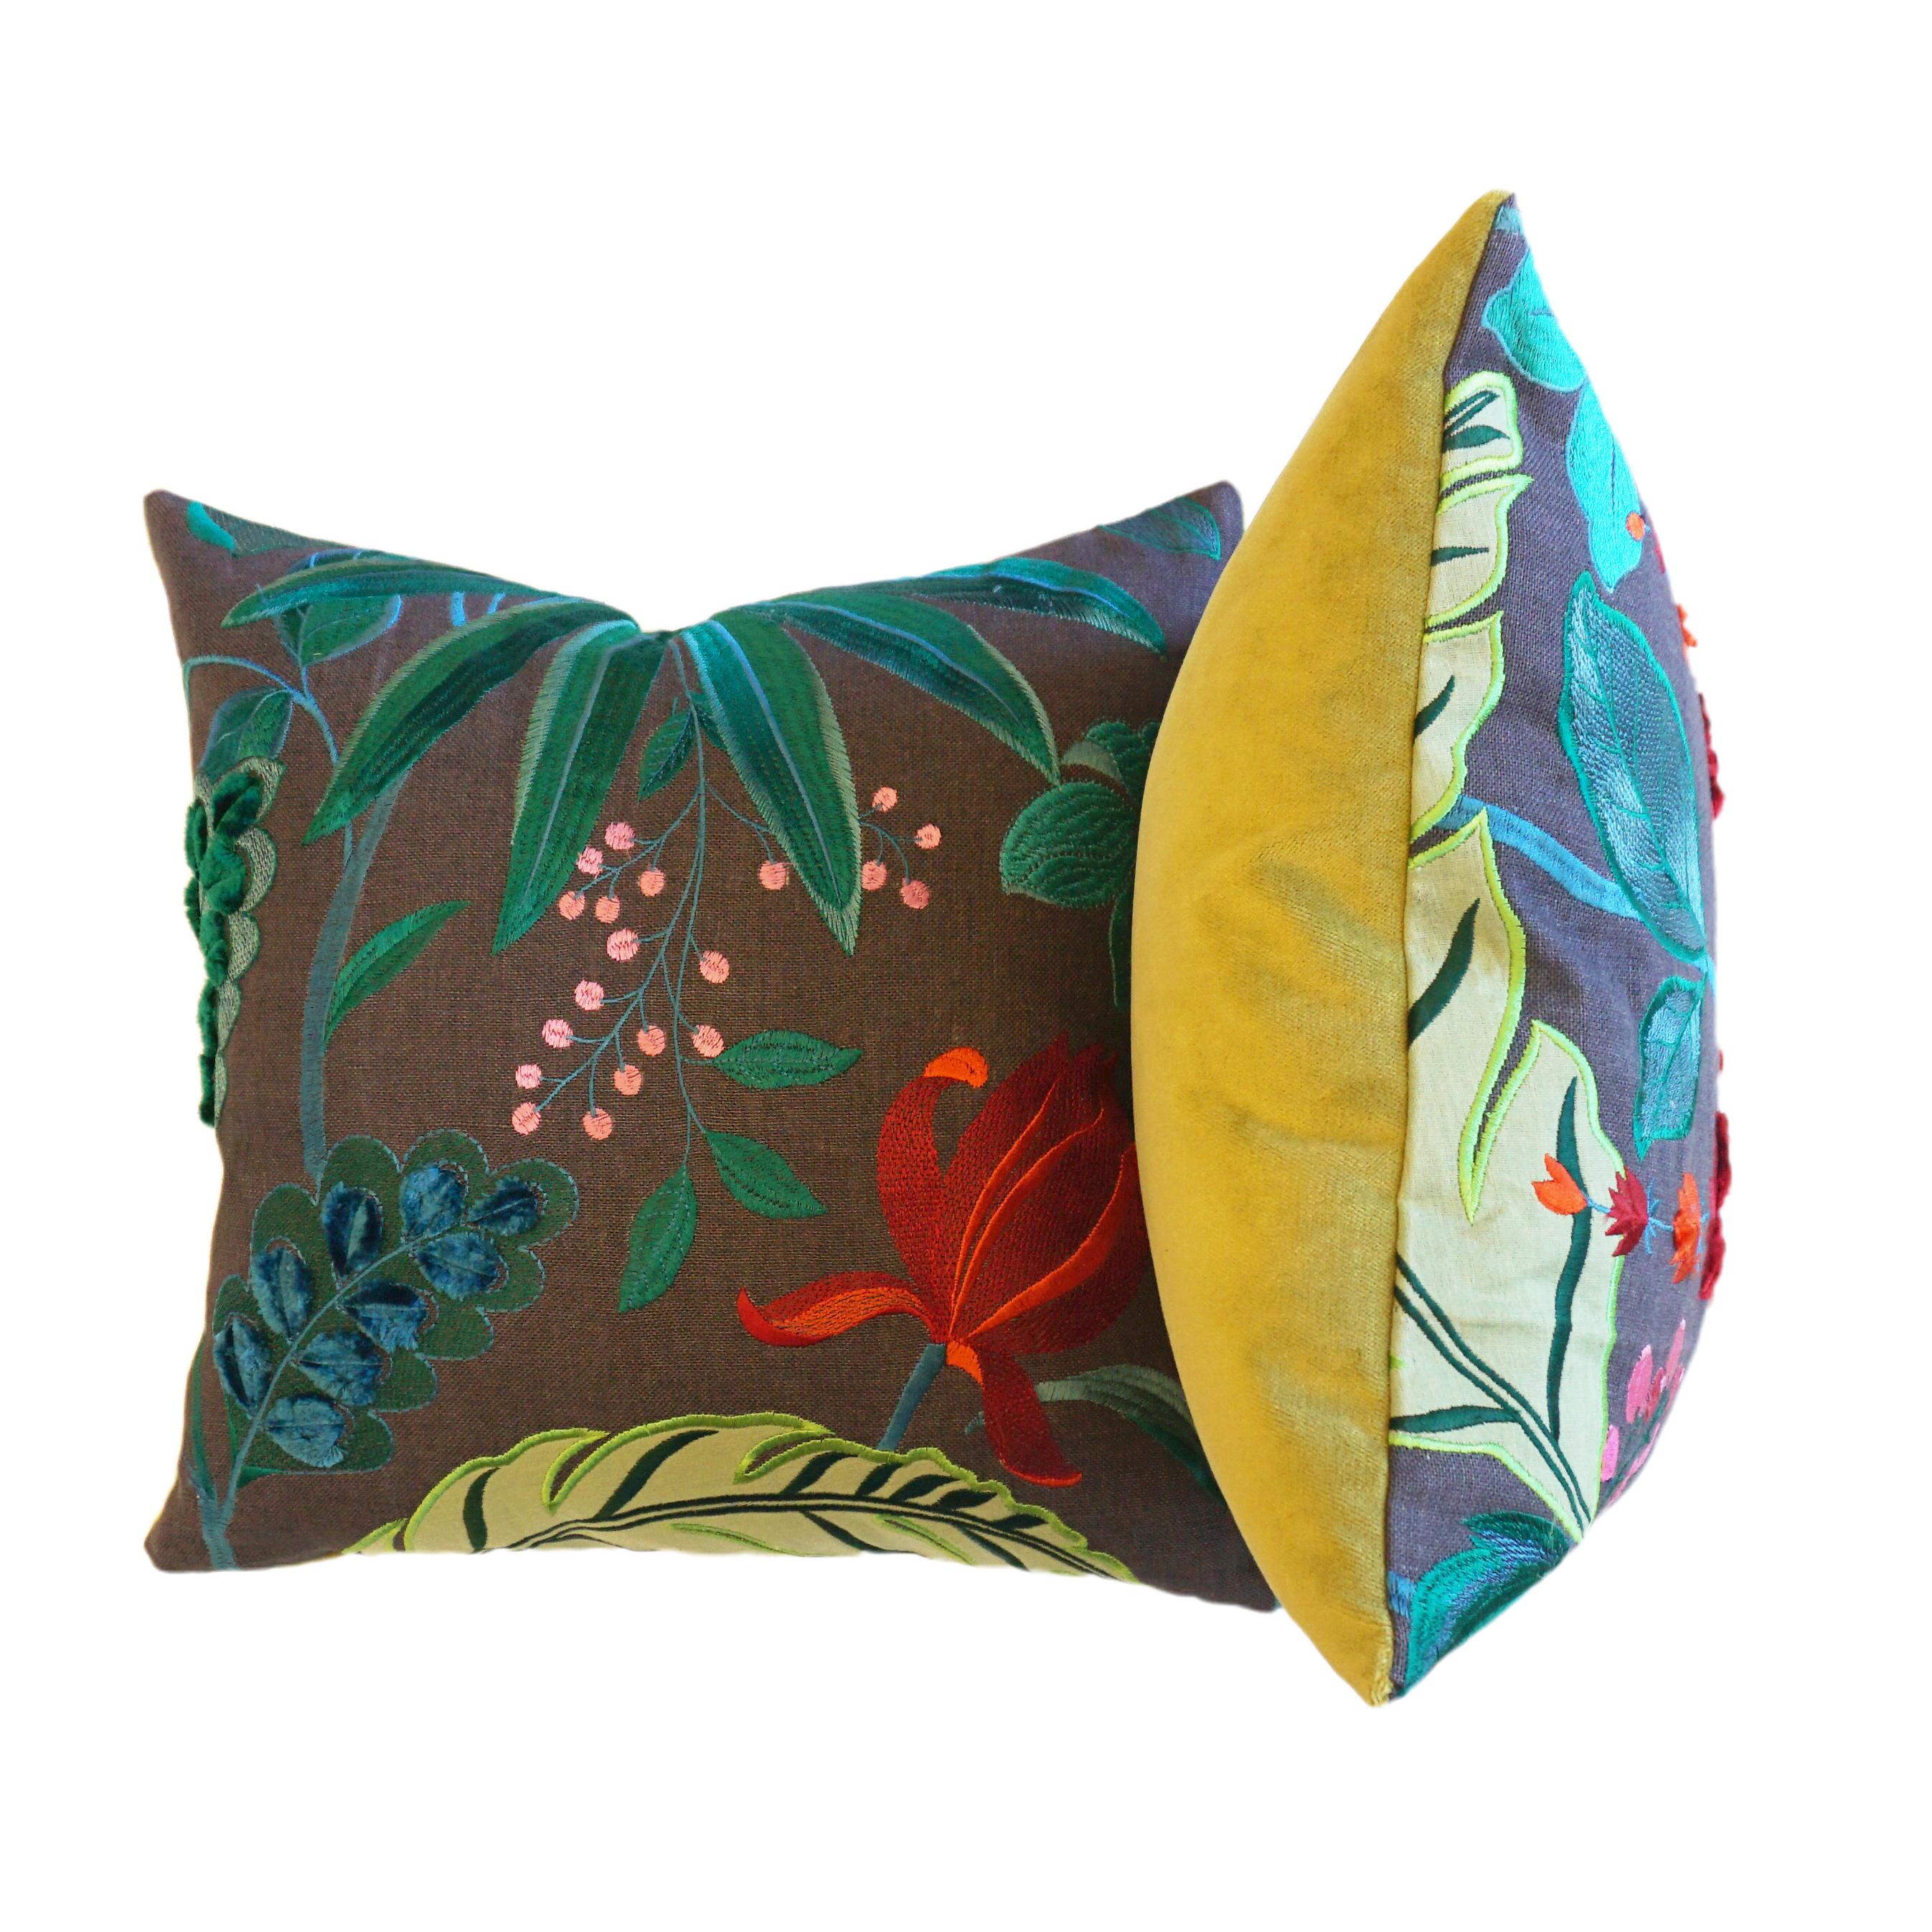 These vibrant throw pillows are made with Matthew Williamson’s Floridita fabric featuring stunning floral embroidery on linen. The back is accented in lime green velvet. All pillows are handmade at our studio in Norwalk, CT. 

Measurements

14”